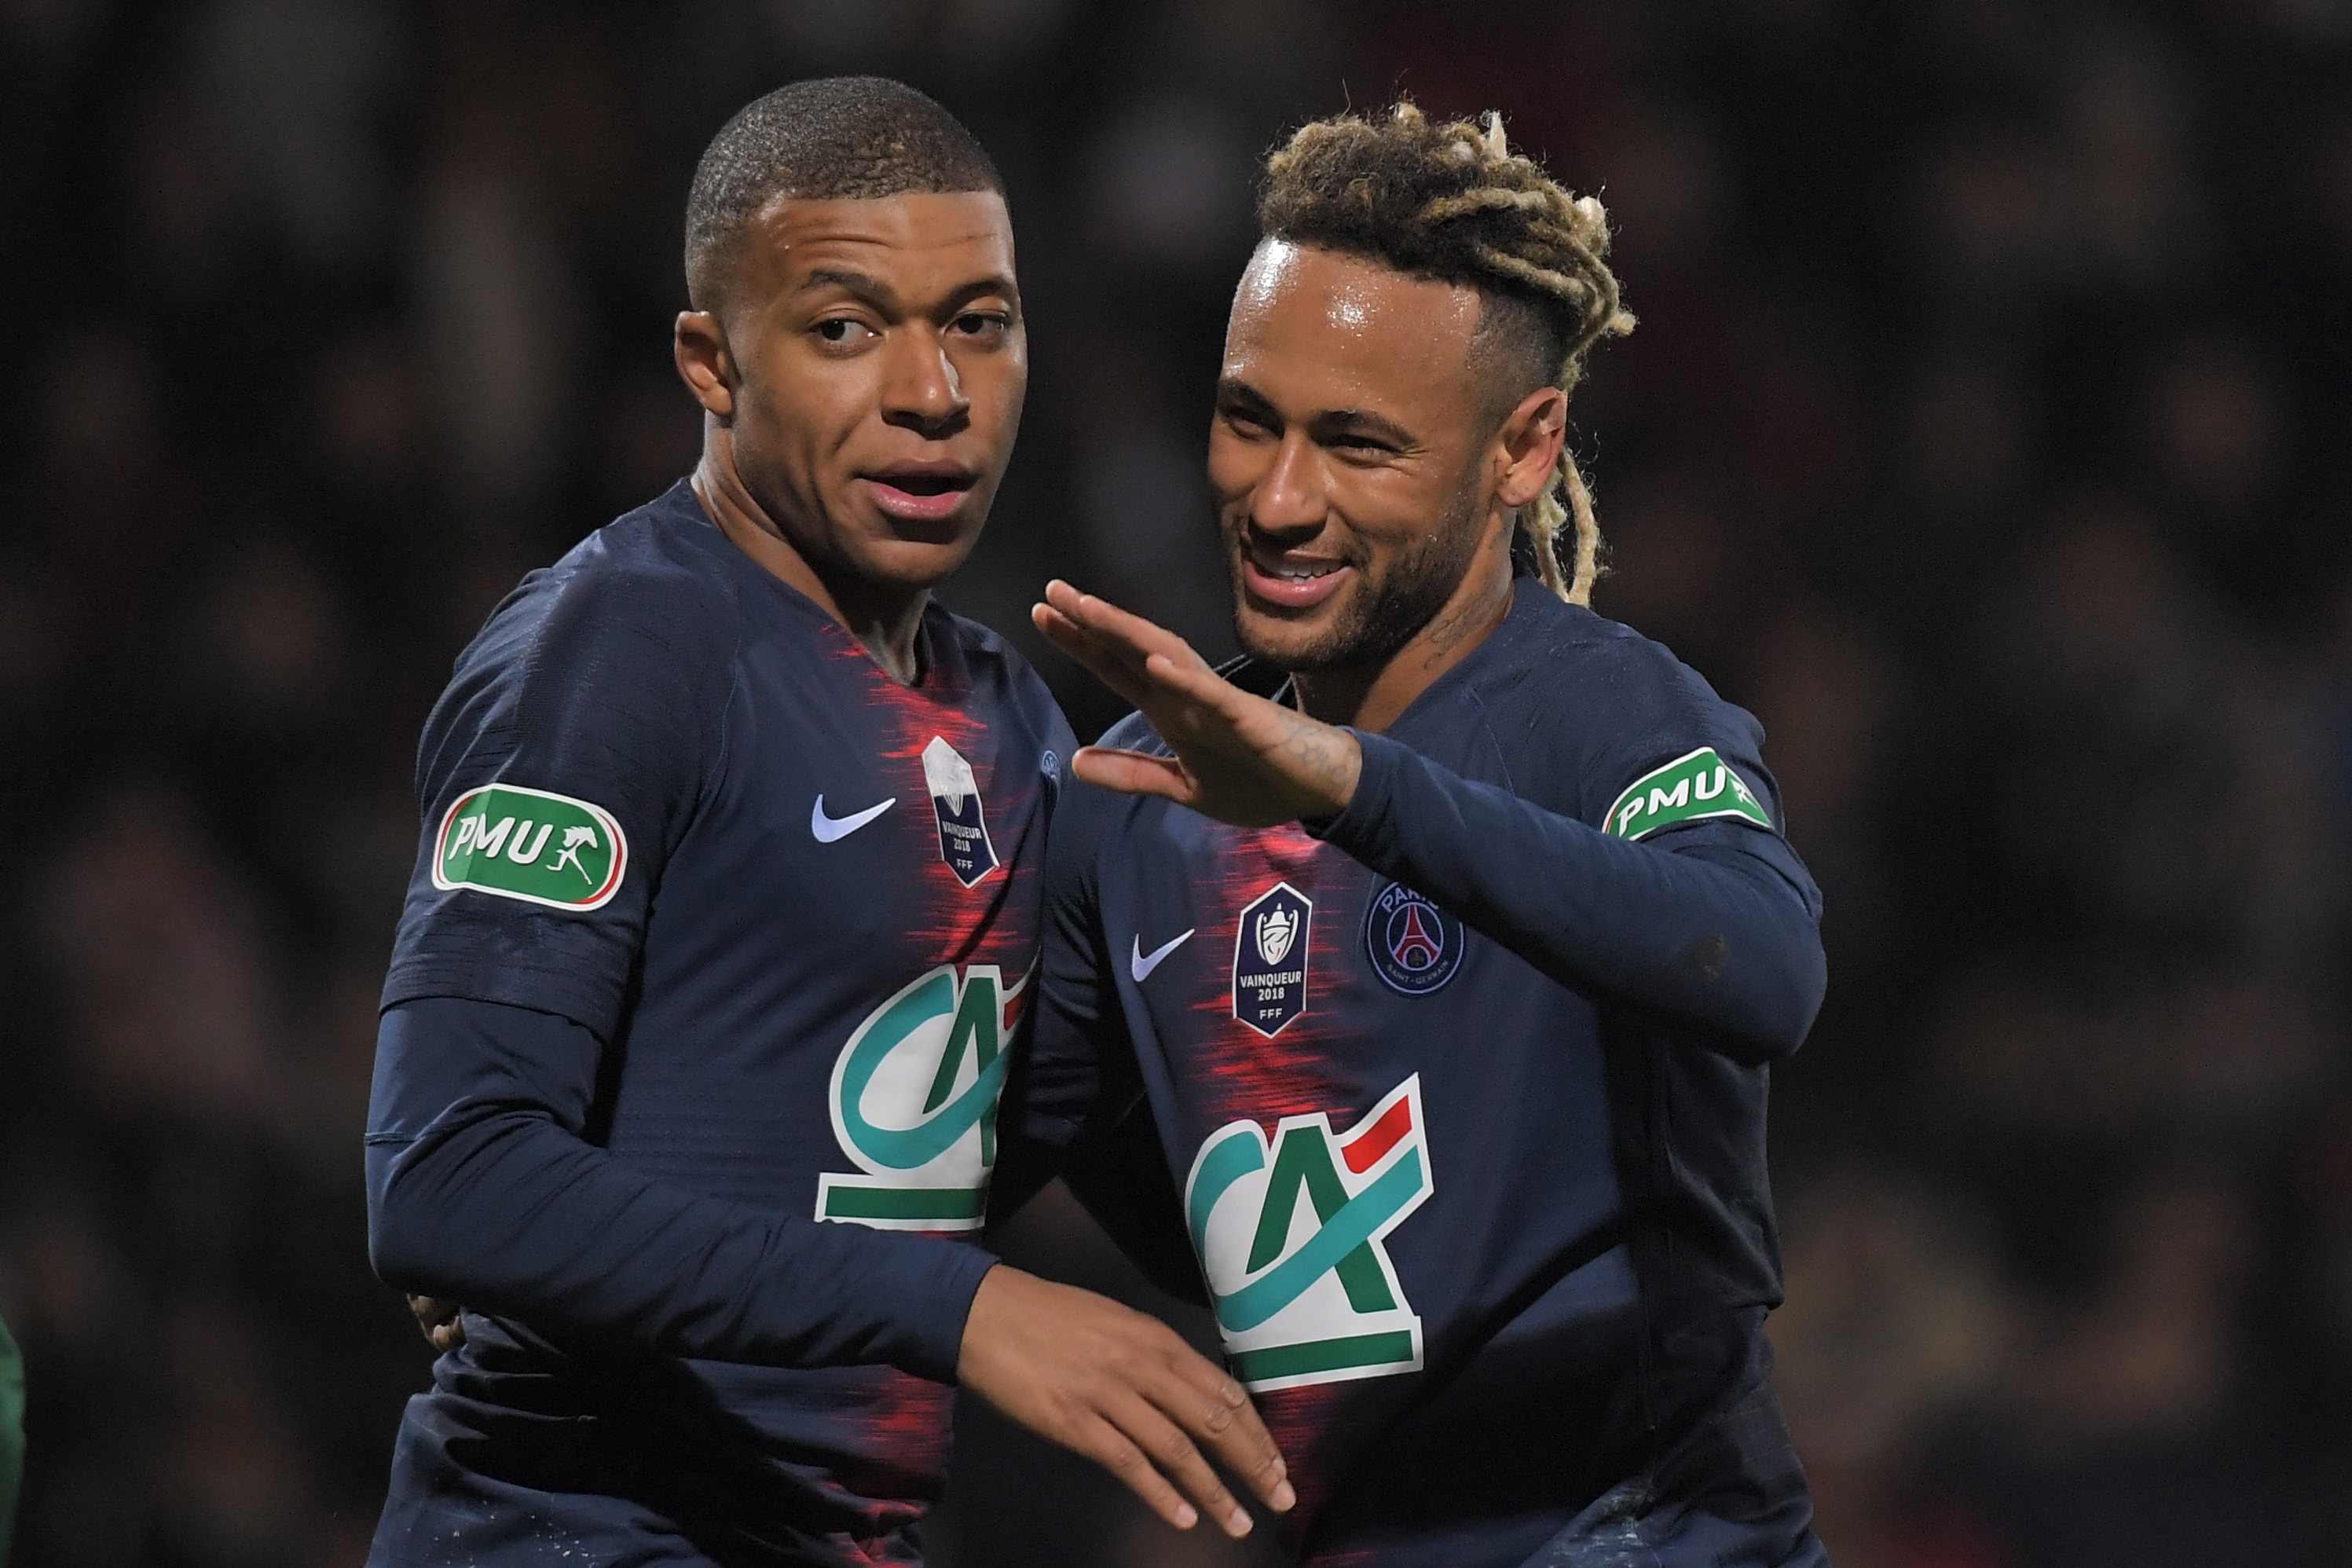 Madrid no longer want Neymar but still remain interested in Mbappe. (Photo courtesy: AFP/Getty)